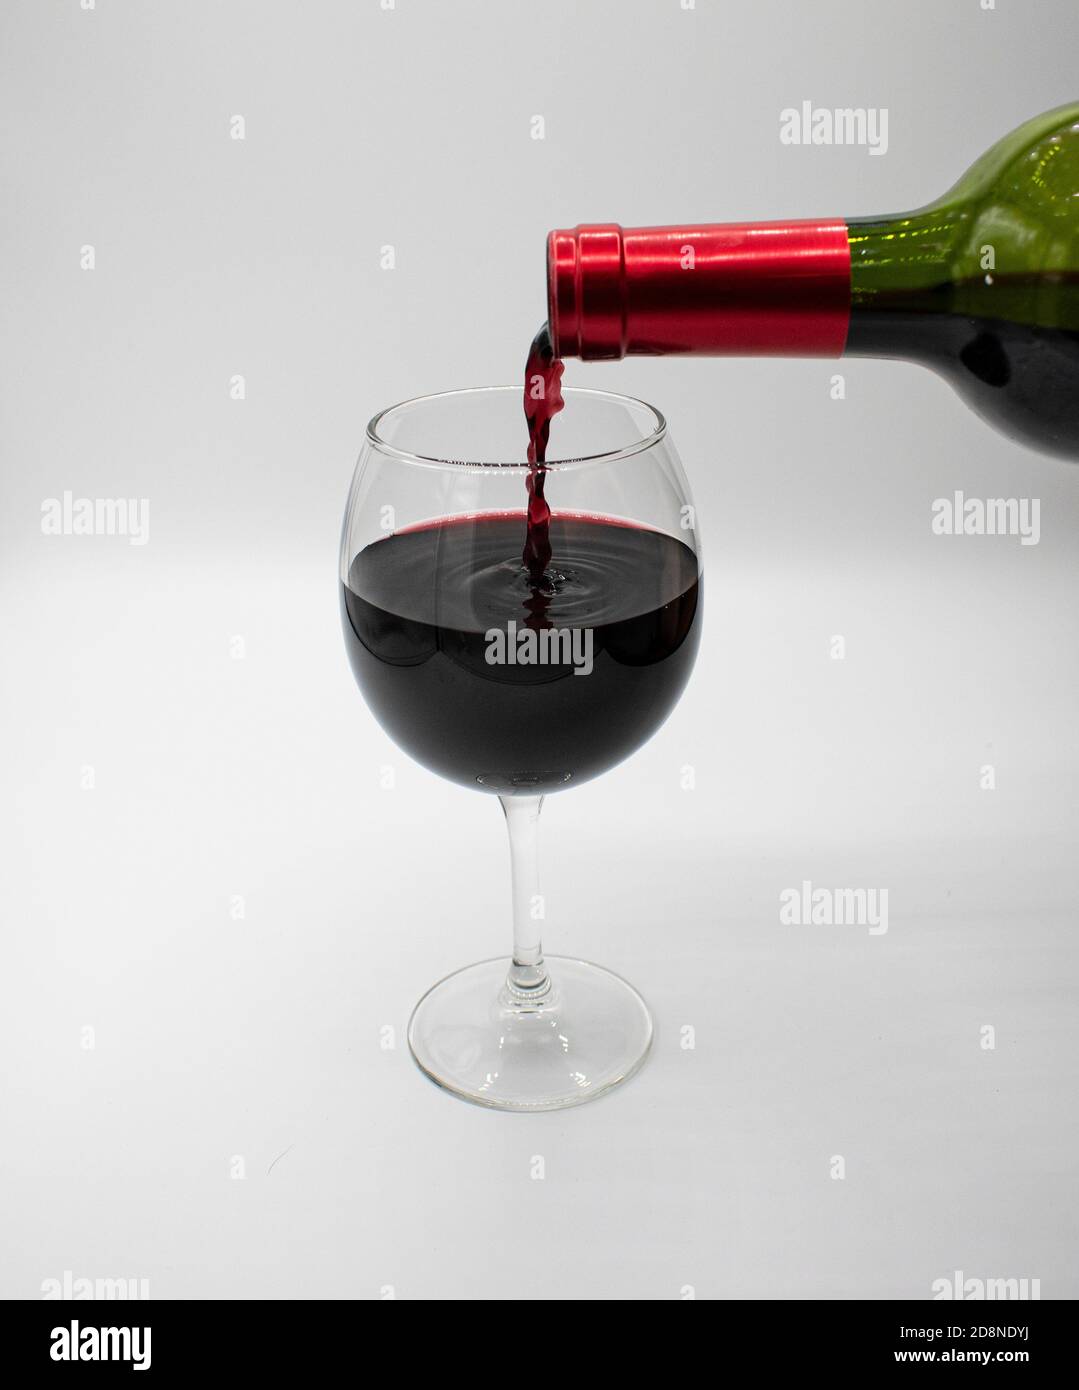 https://c8.alamy.com/comp/2D8NDYJ/close-up-of-wine-glass-with-red-wine-from-the-bottle-going-into-the-glass-2D8NDYJ.jpg